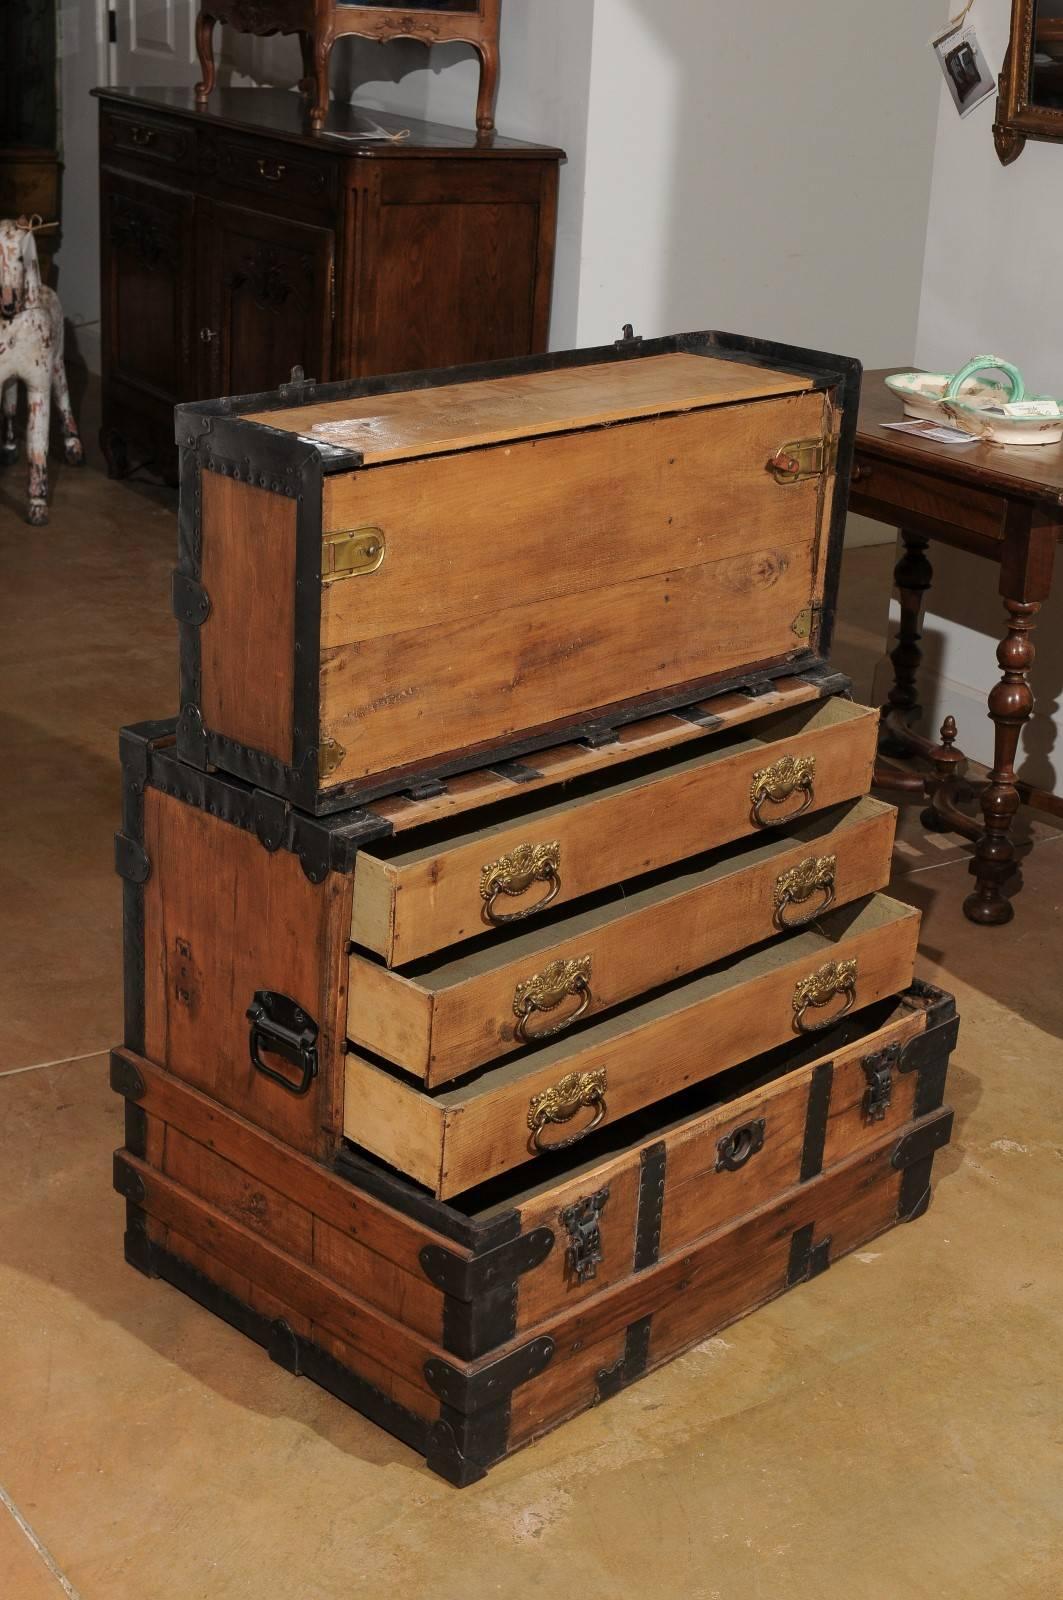 An English antique wooden steamer trunk with iron banding and multiple compartments from the 20th century. This English steamer trunk features a linear wooden body, reinforced with exceptional iron banding. The trunk ingeniously opens via a brass